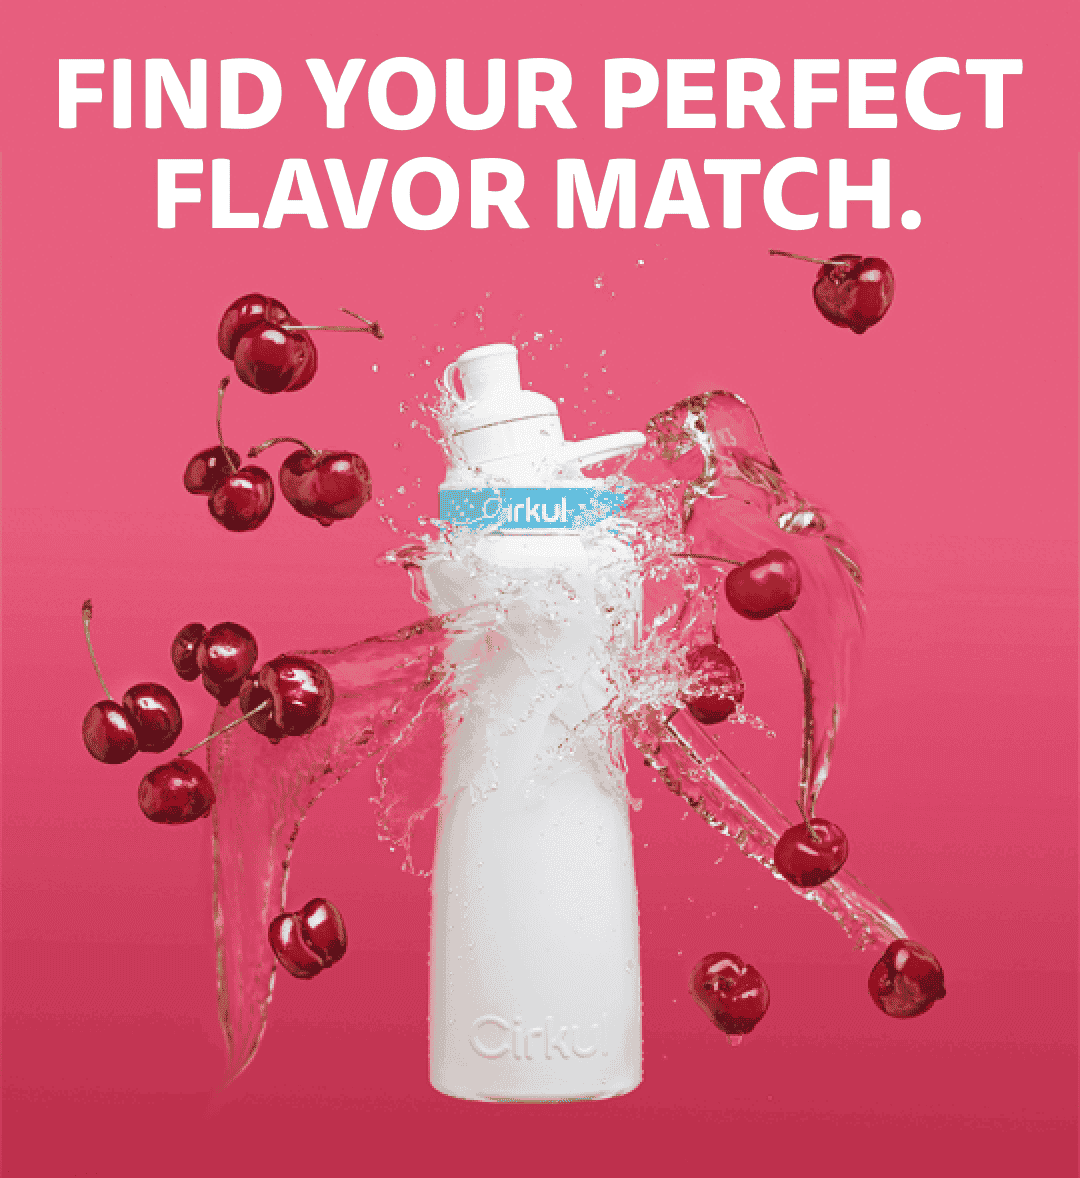 FIND YOUR PERFECT FLAVOR MATCH.